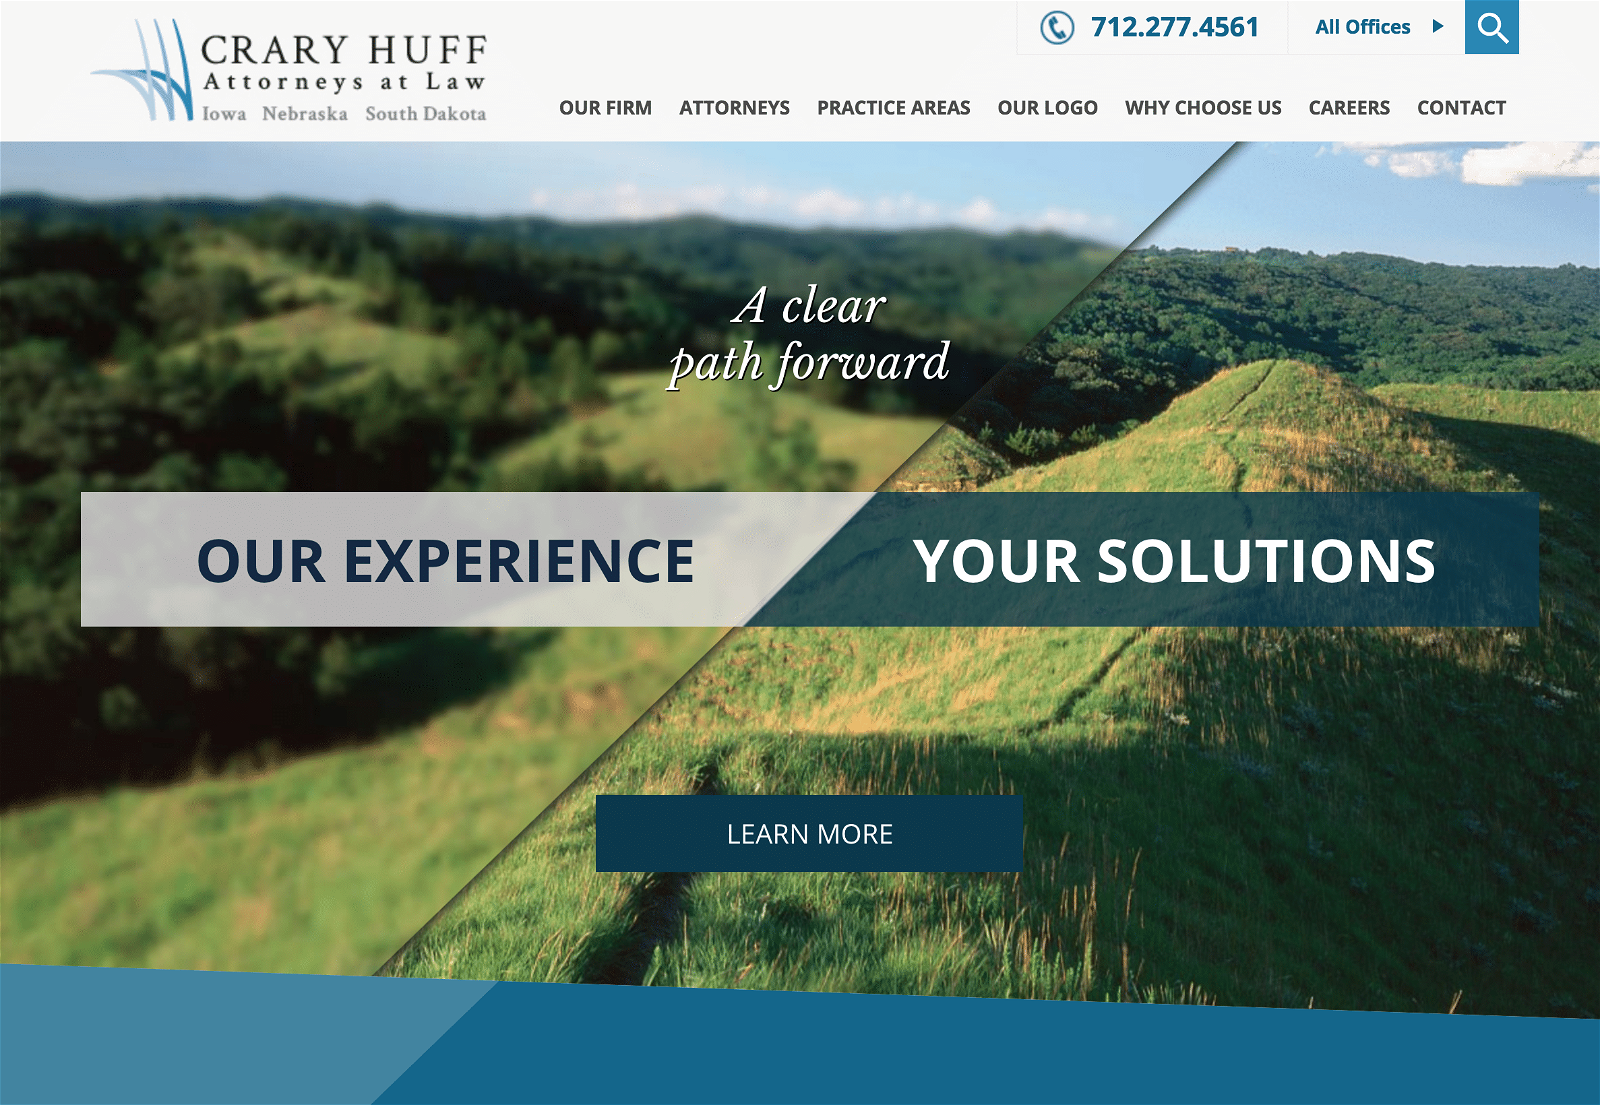 Crary Huff Attorneys at Law